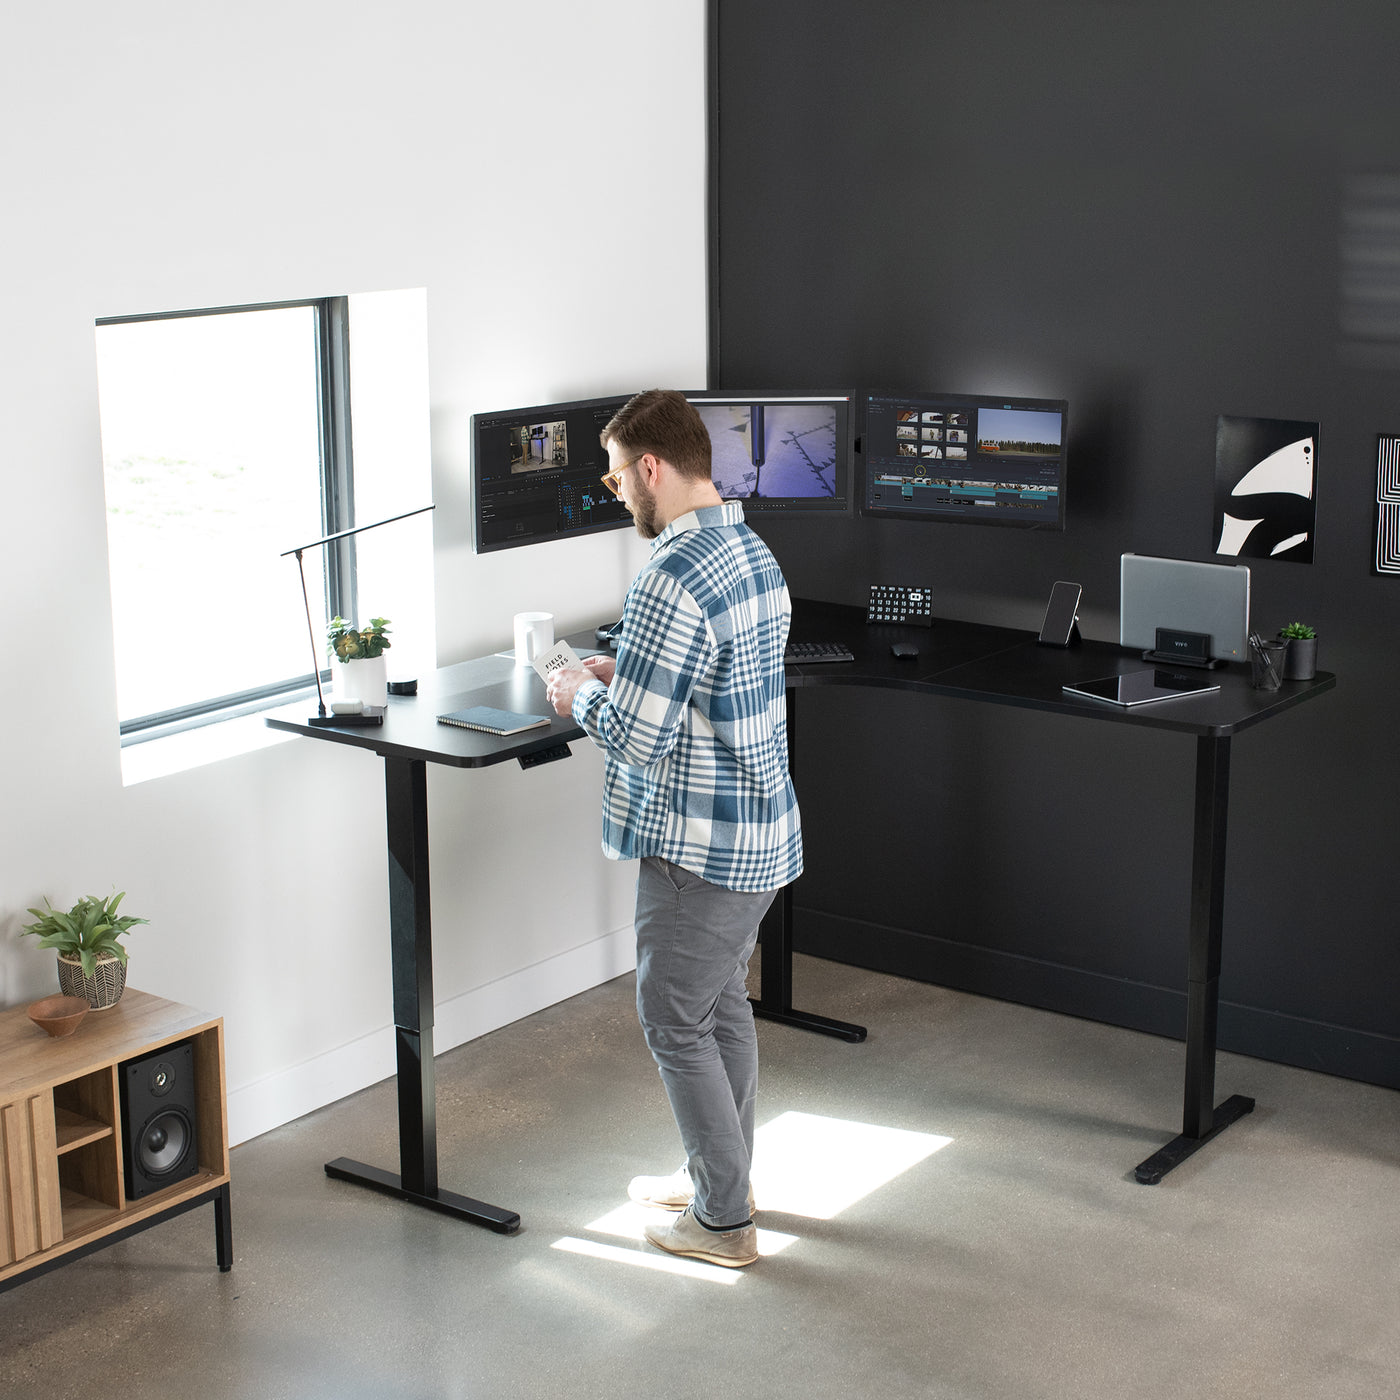 Man working at L-shaped standing desk aligned with the corner walls of an office room.